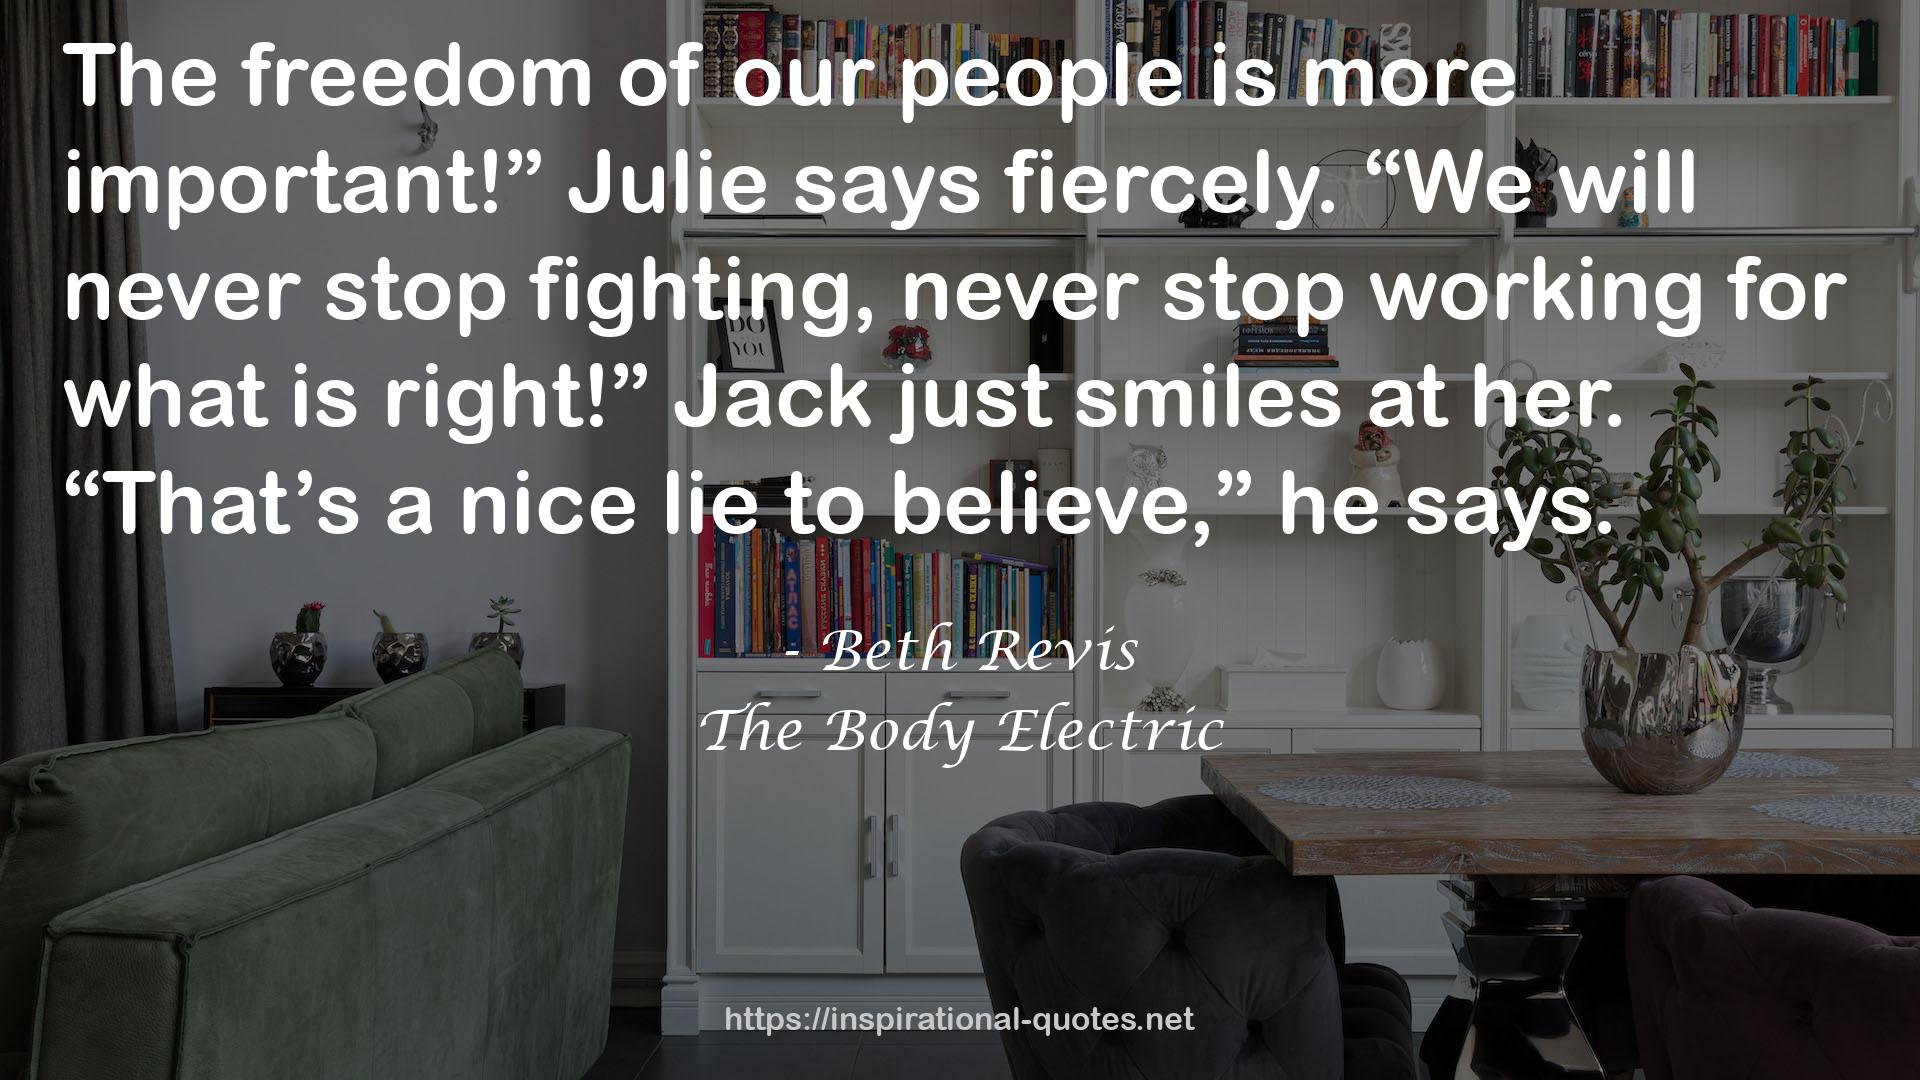 right!”Jack  QUOTES